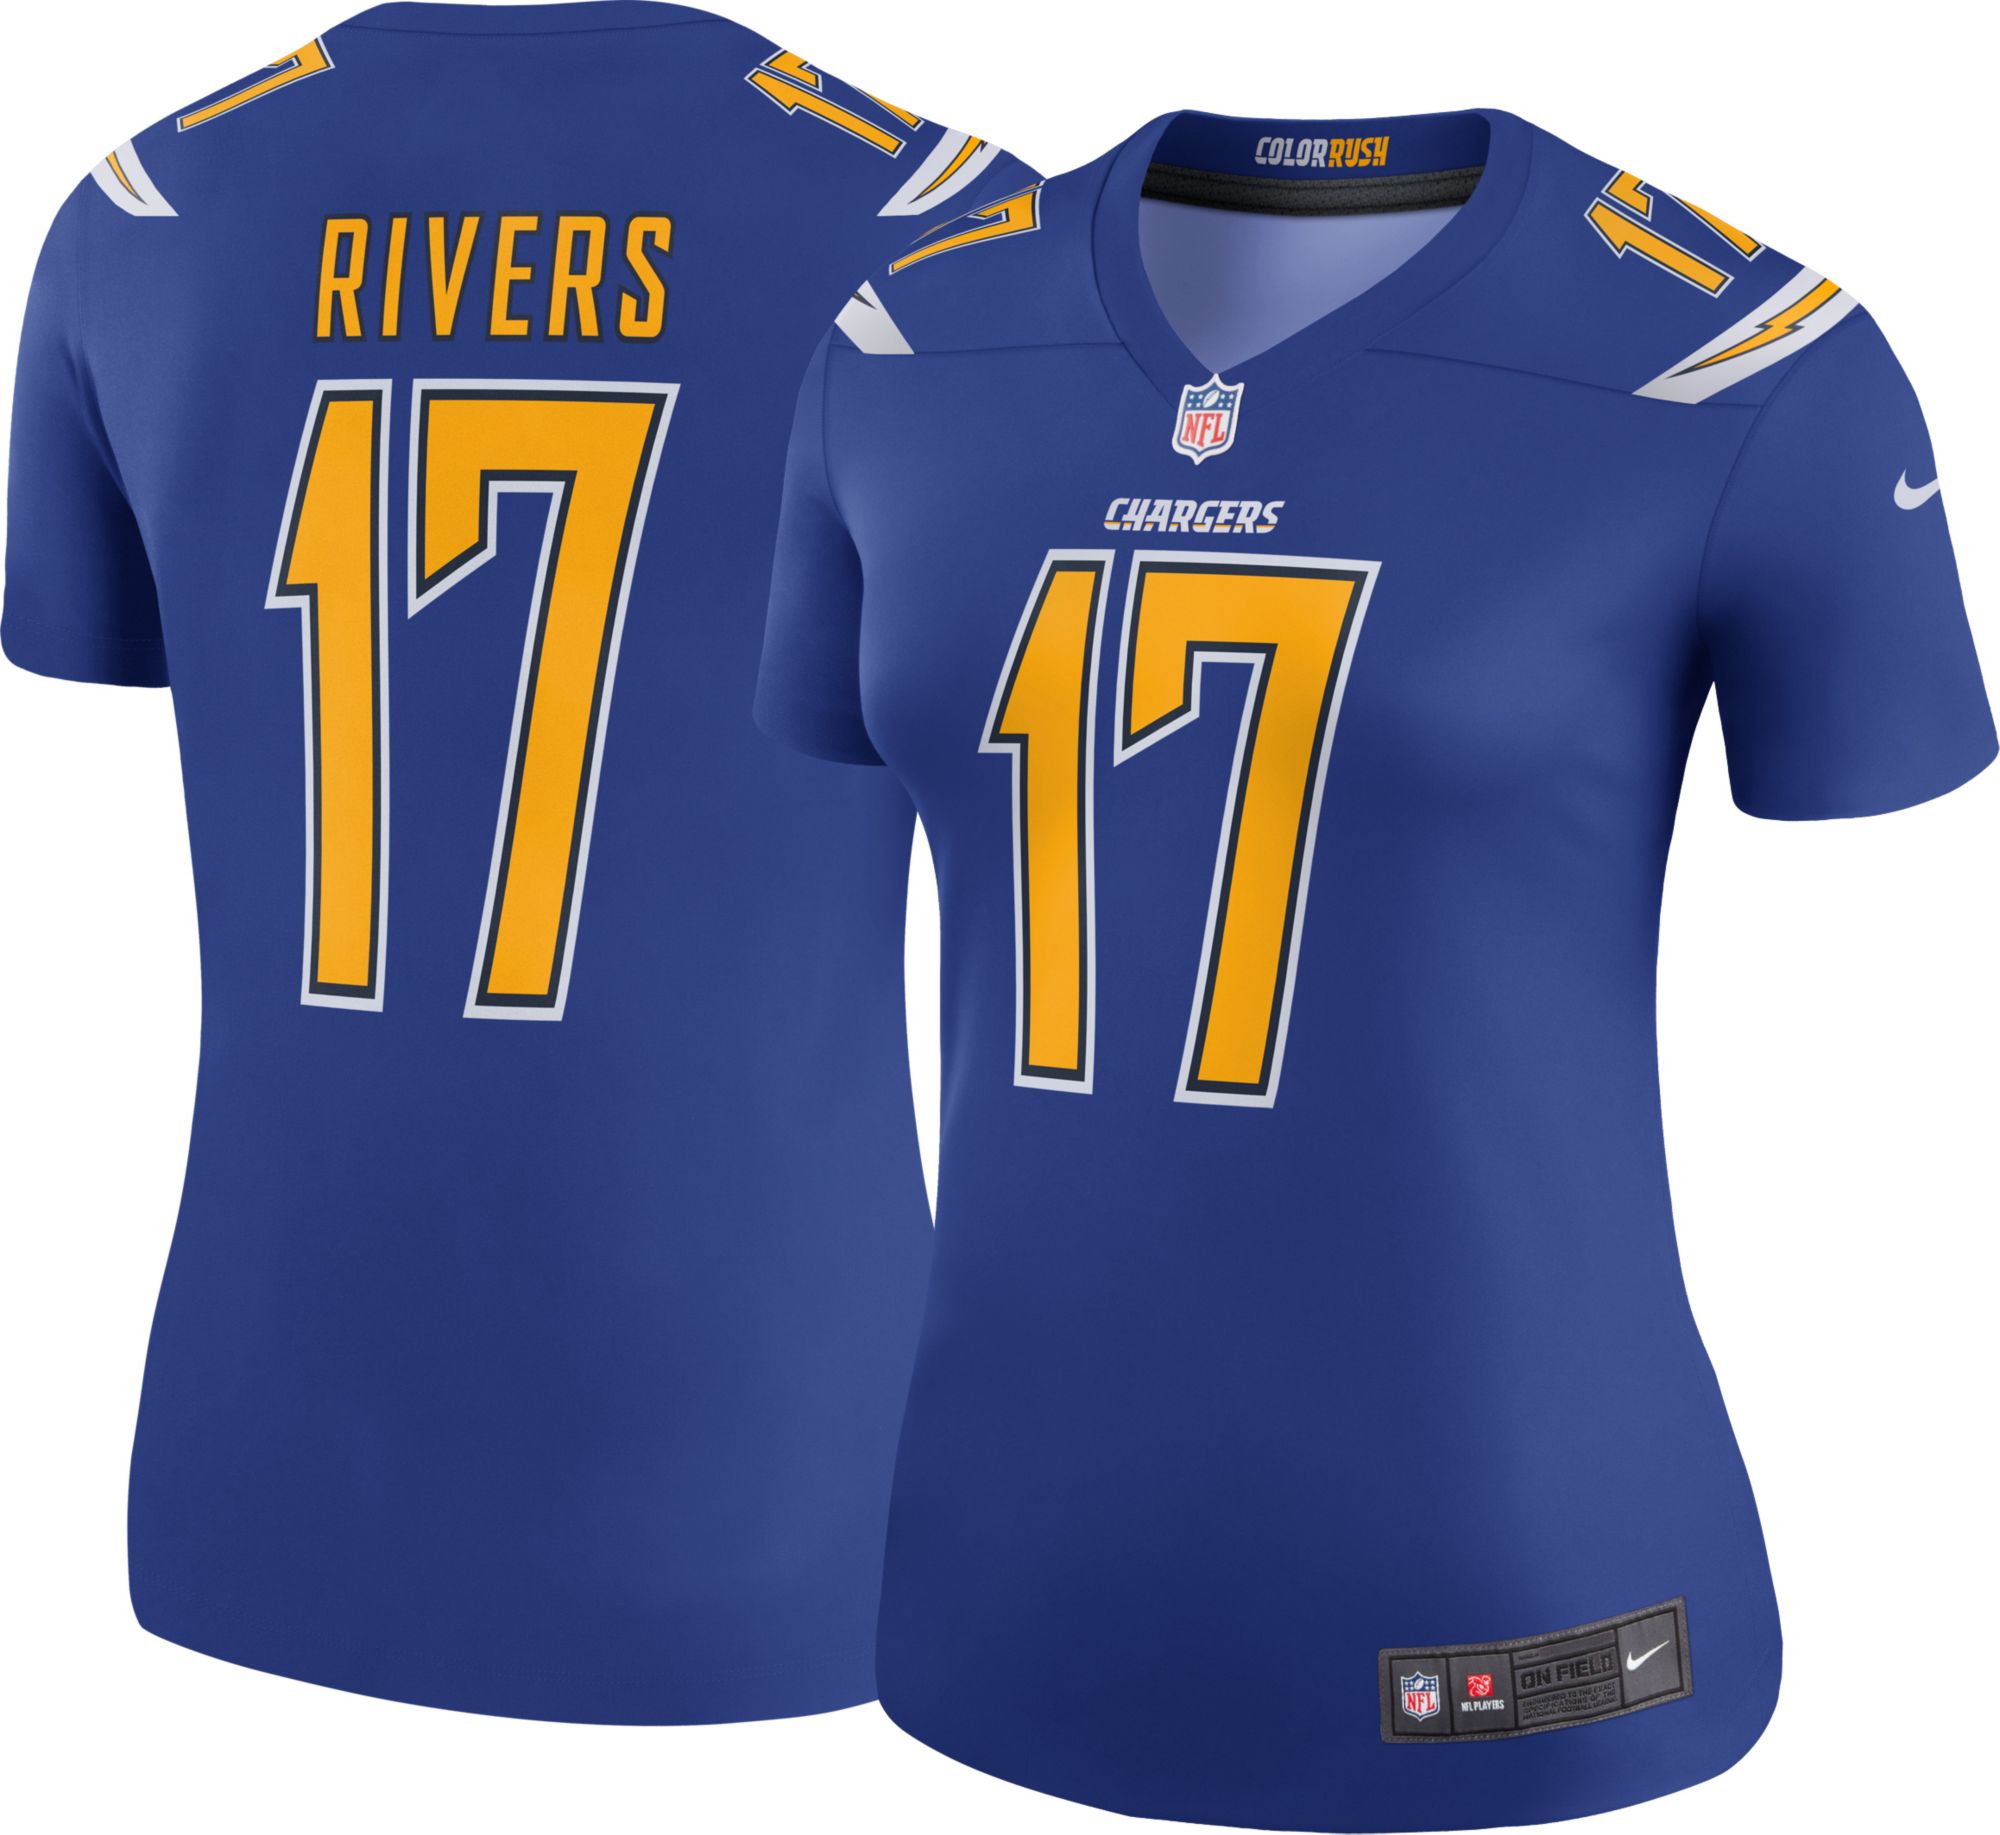 rivers color rush jersey